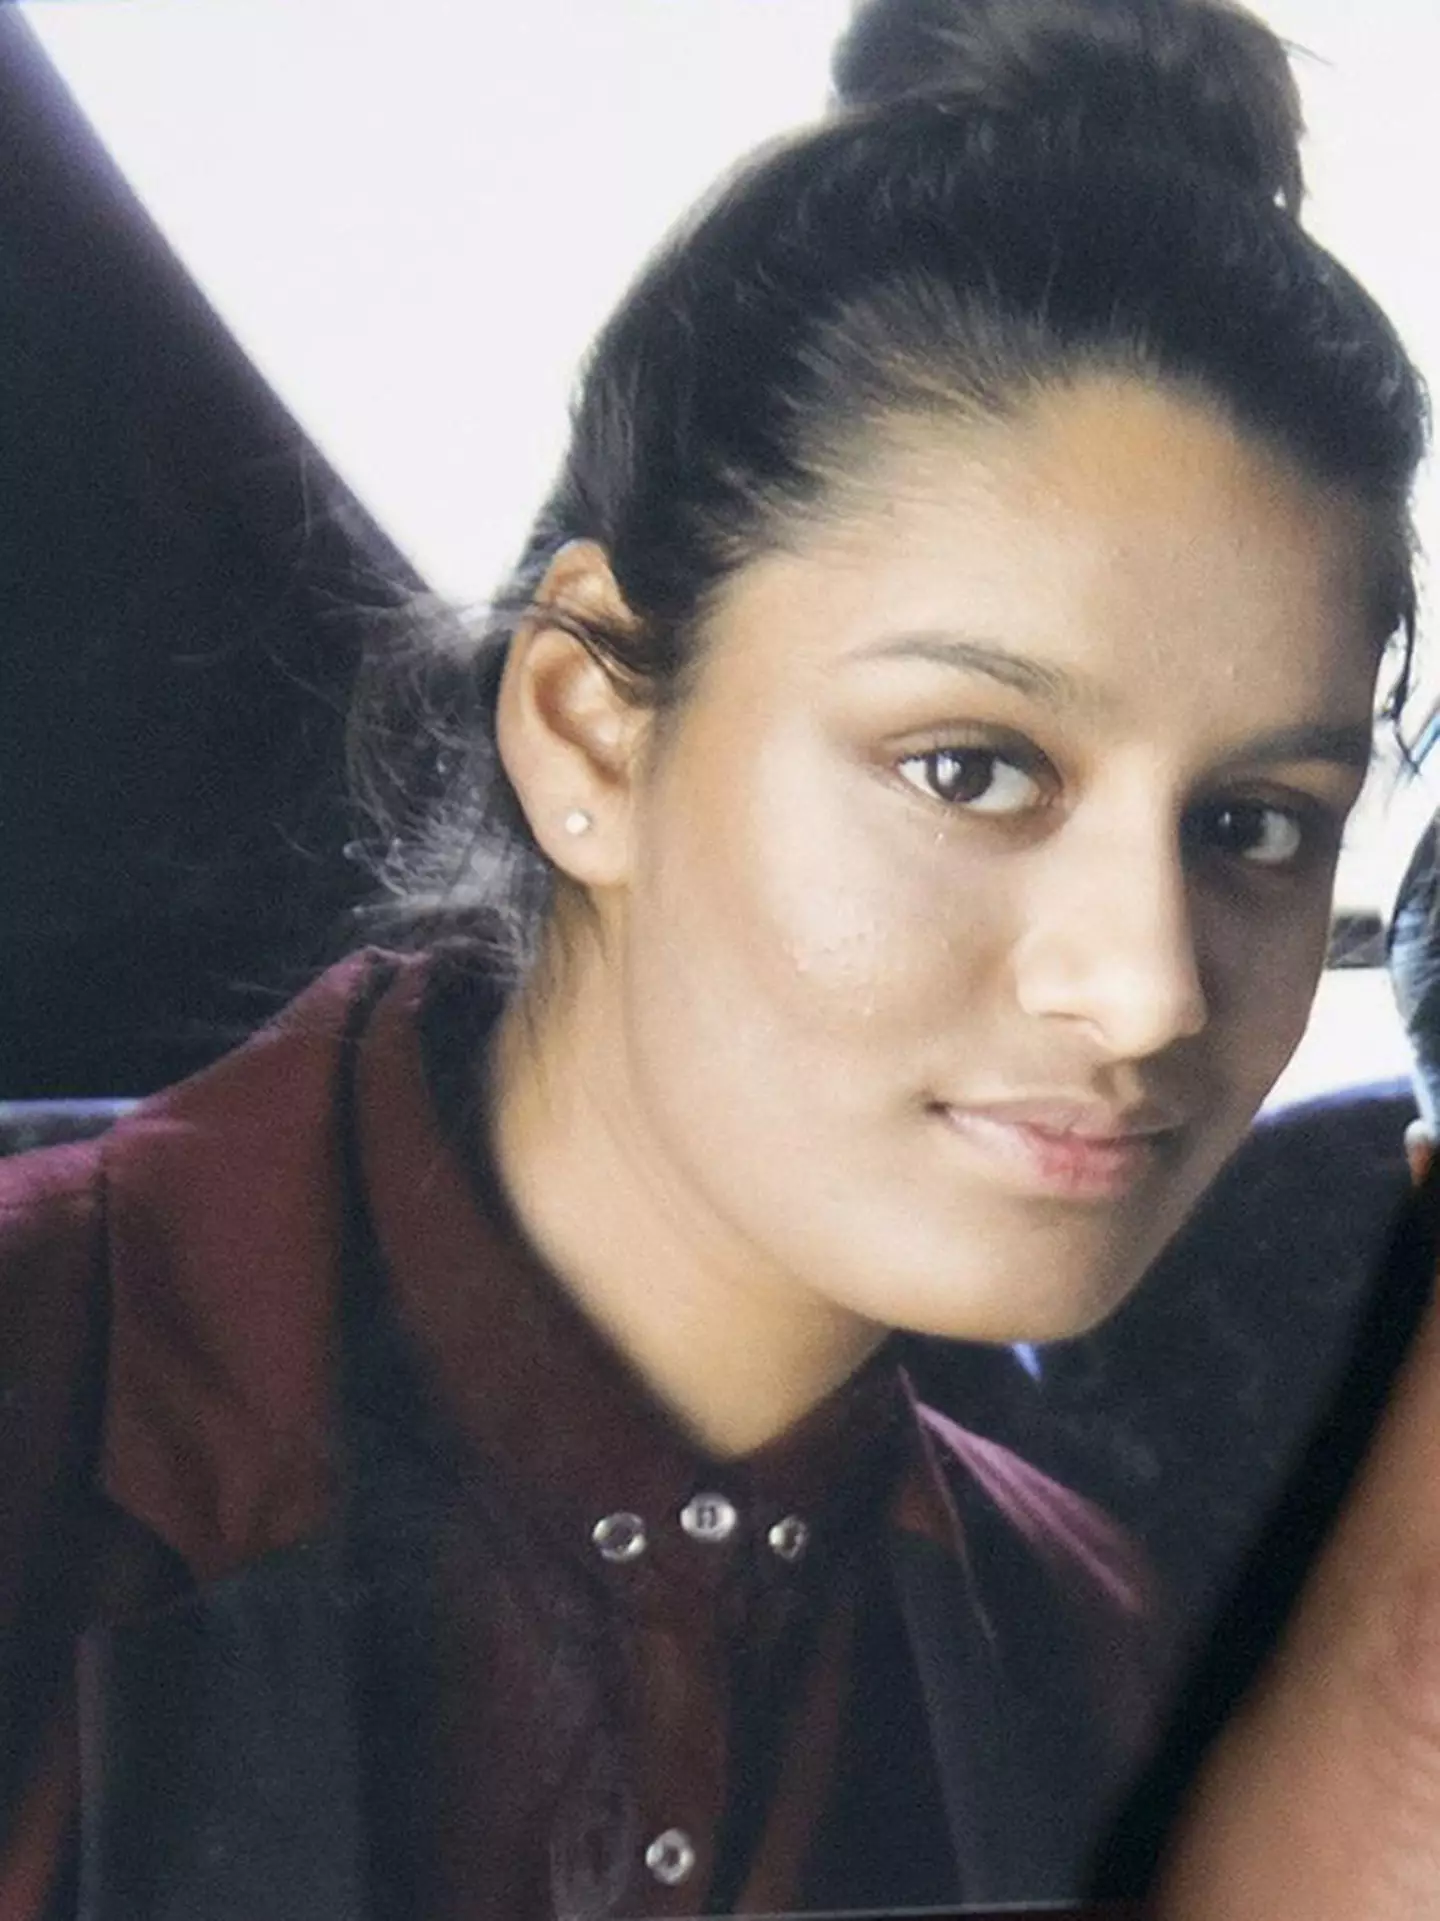 Shamima Begum left the UK in 2015 to join ISIS, but now claims she was brainwashed and trafficked.